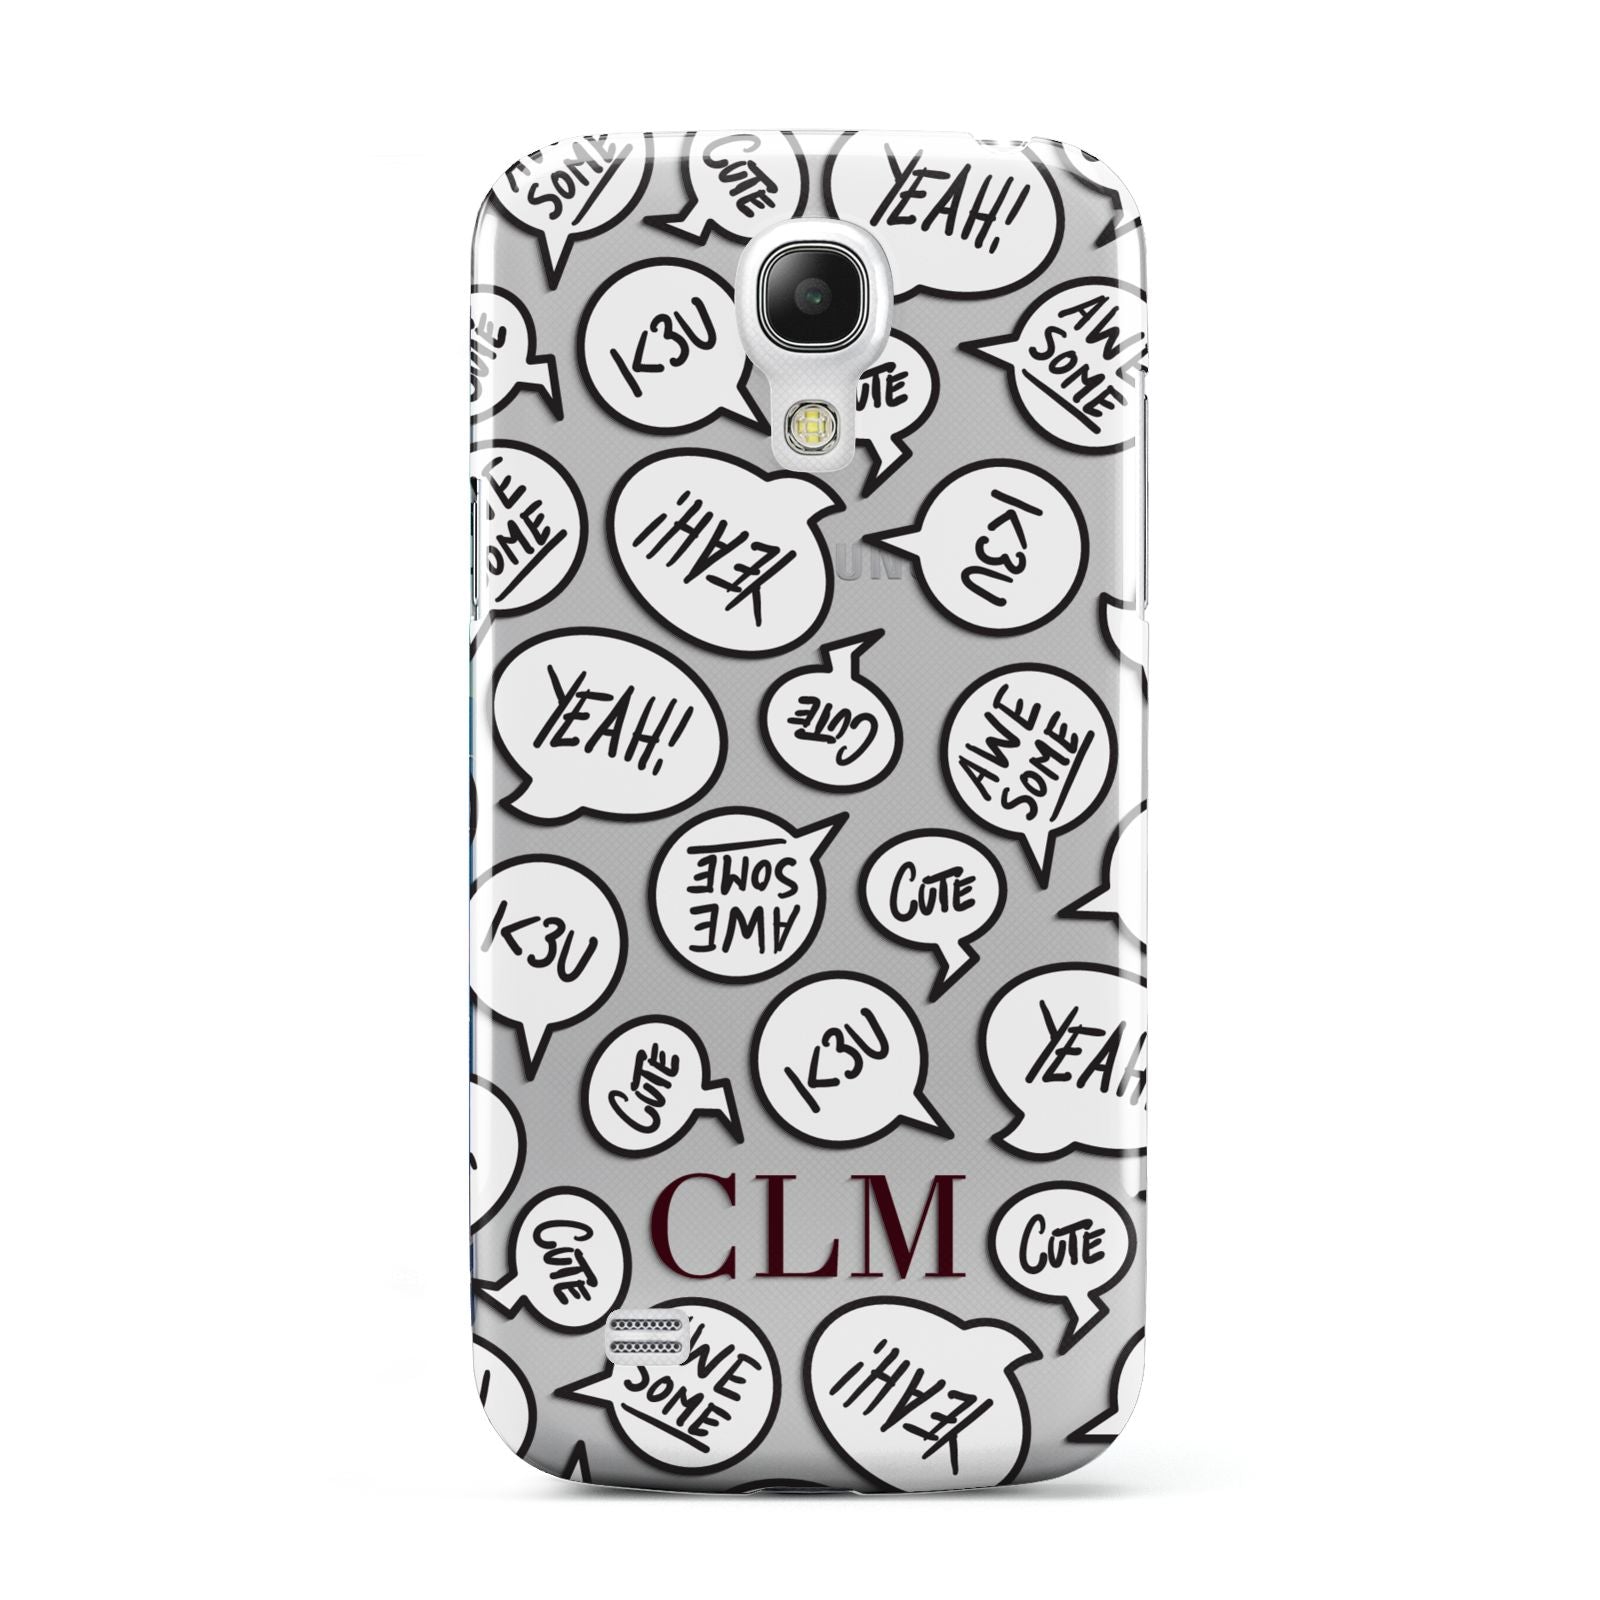 Personalised Sayings With Initials Samsung Galaxy S4 Mini Case